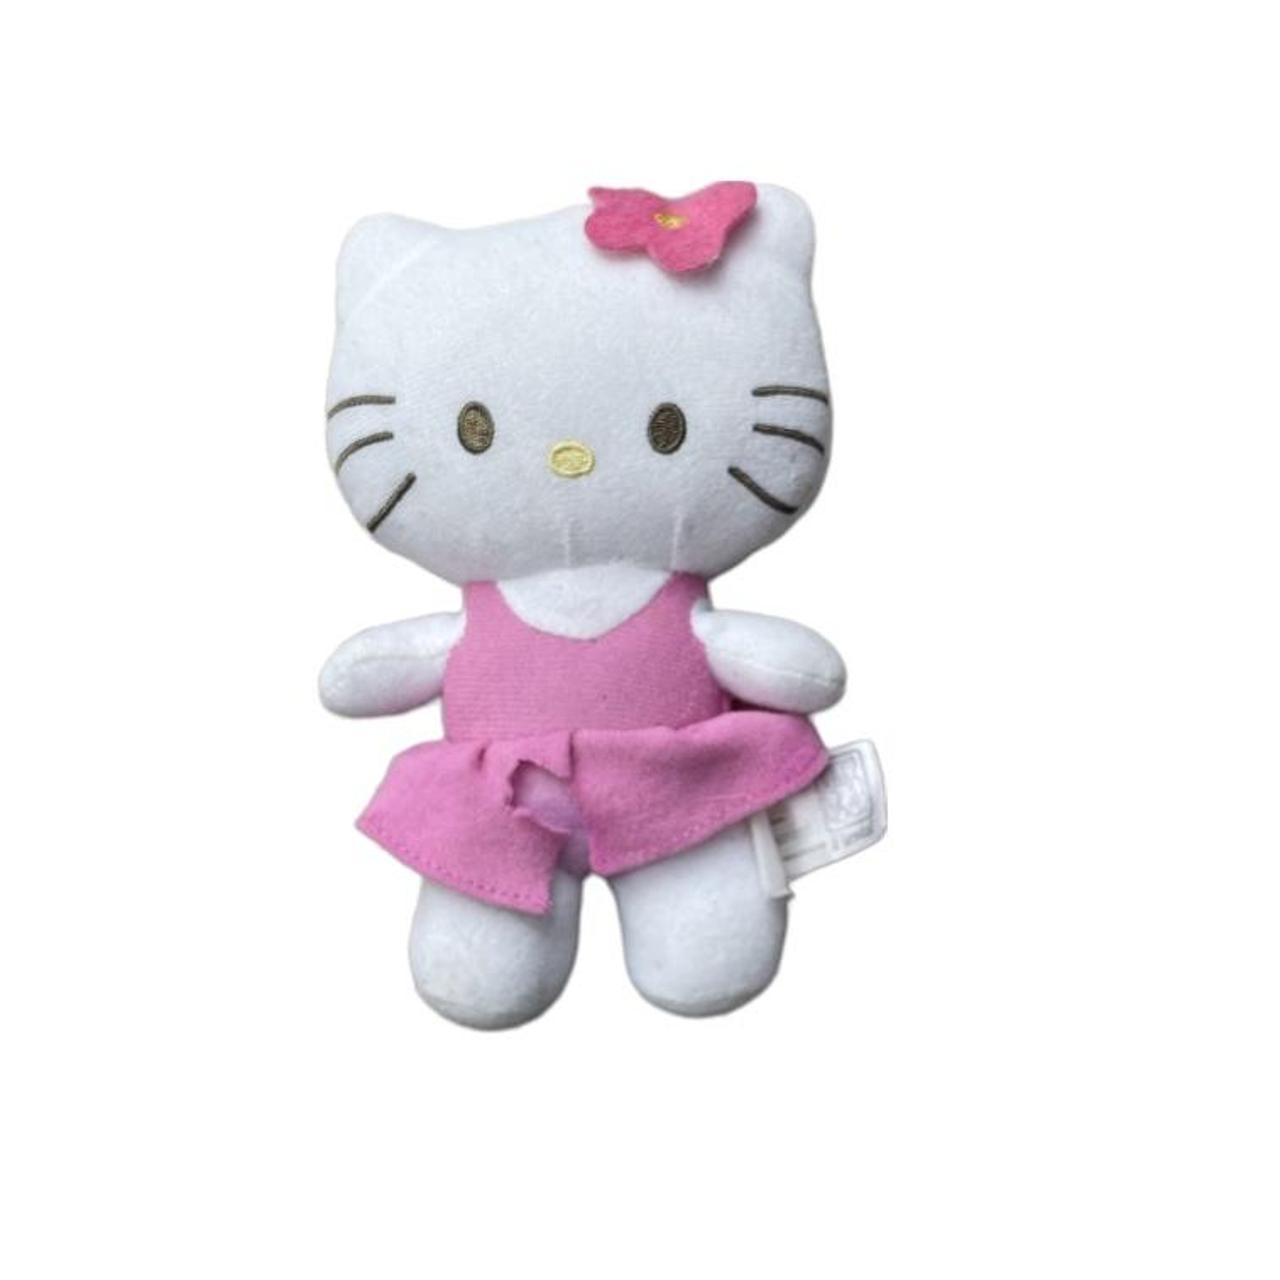 Product Image 1 - Vintage Hello Kitty Plush
All offers